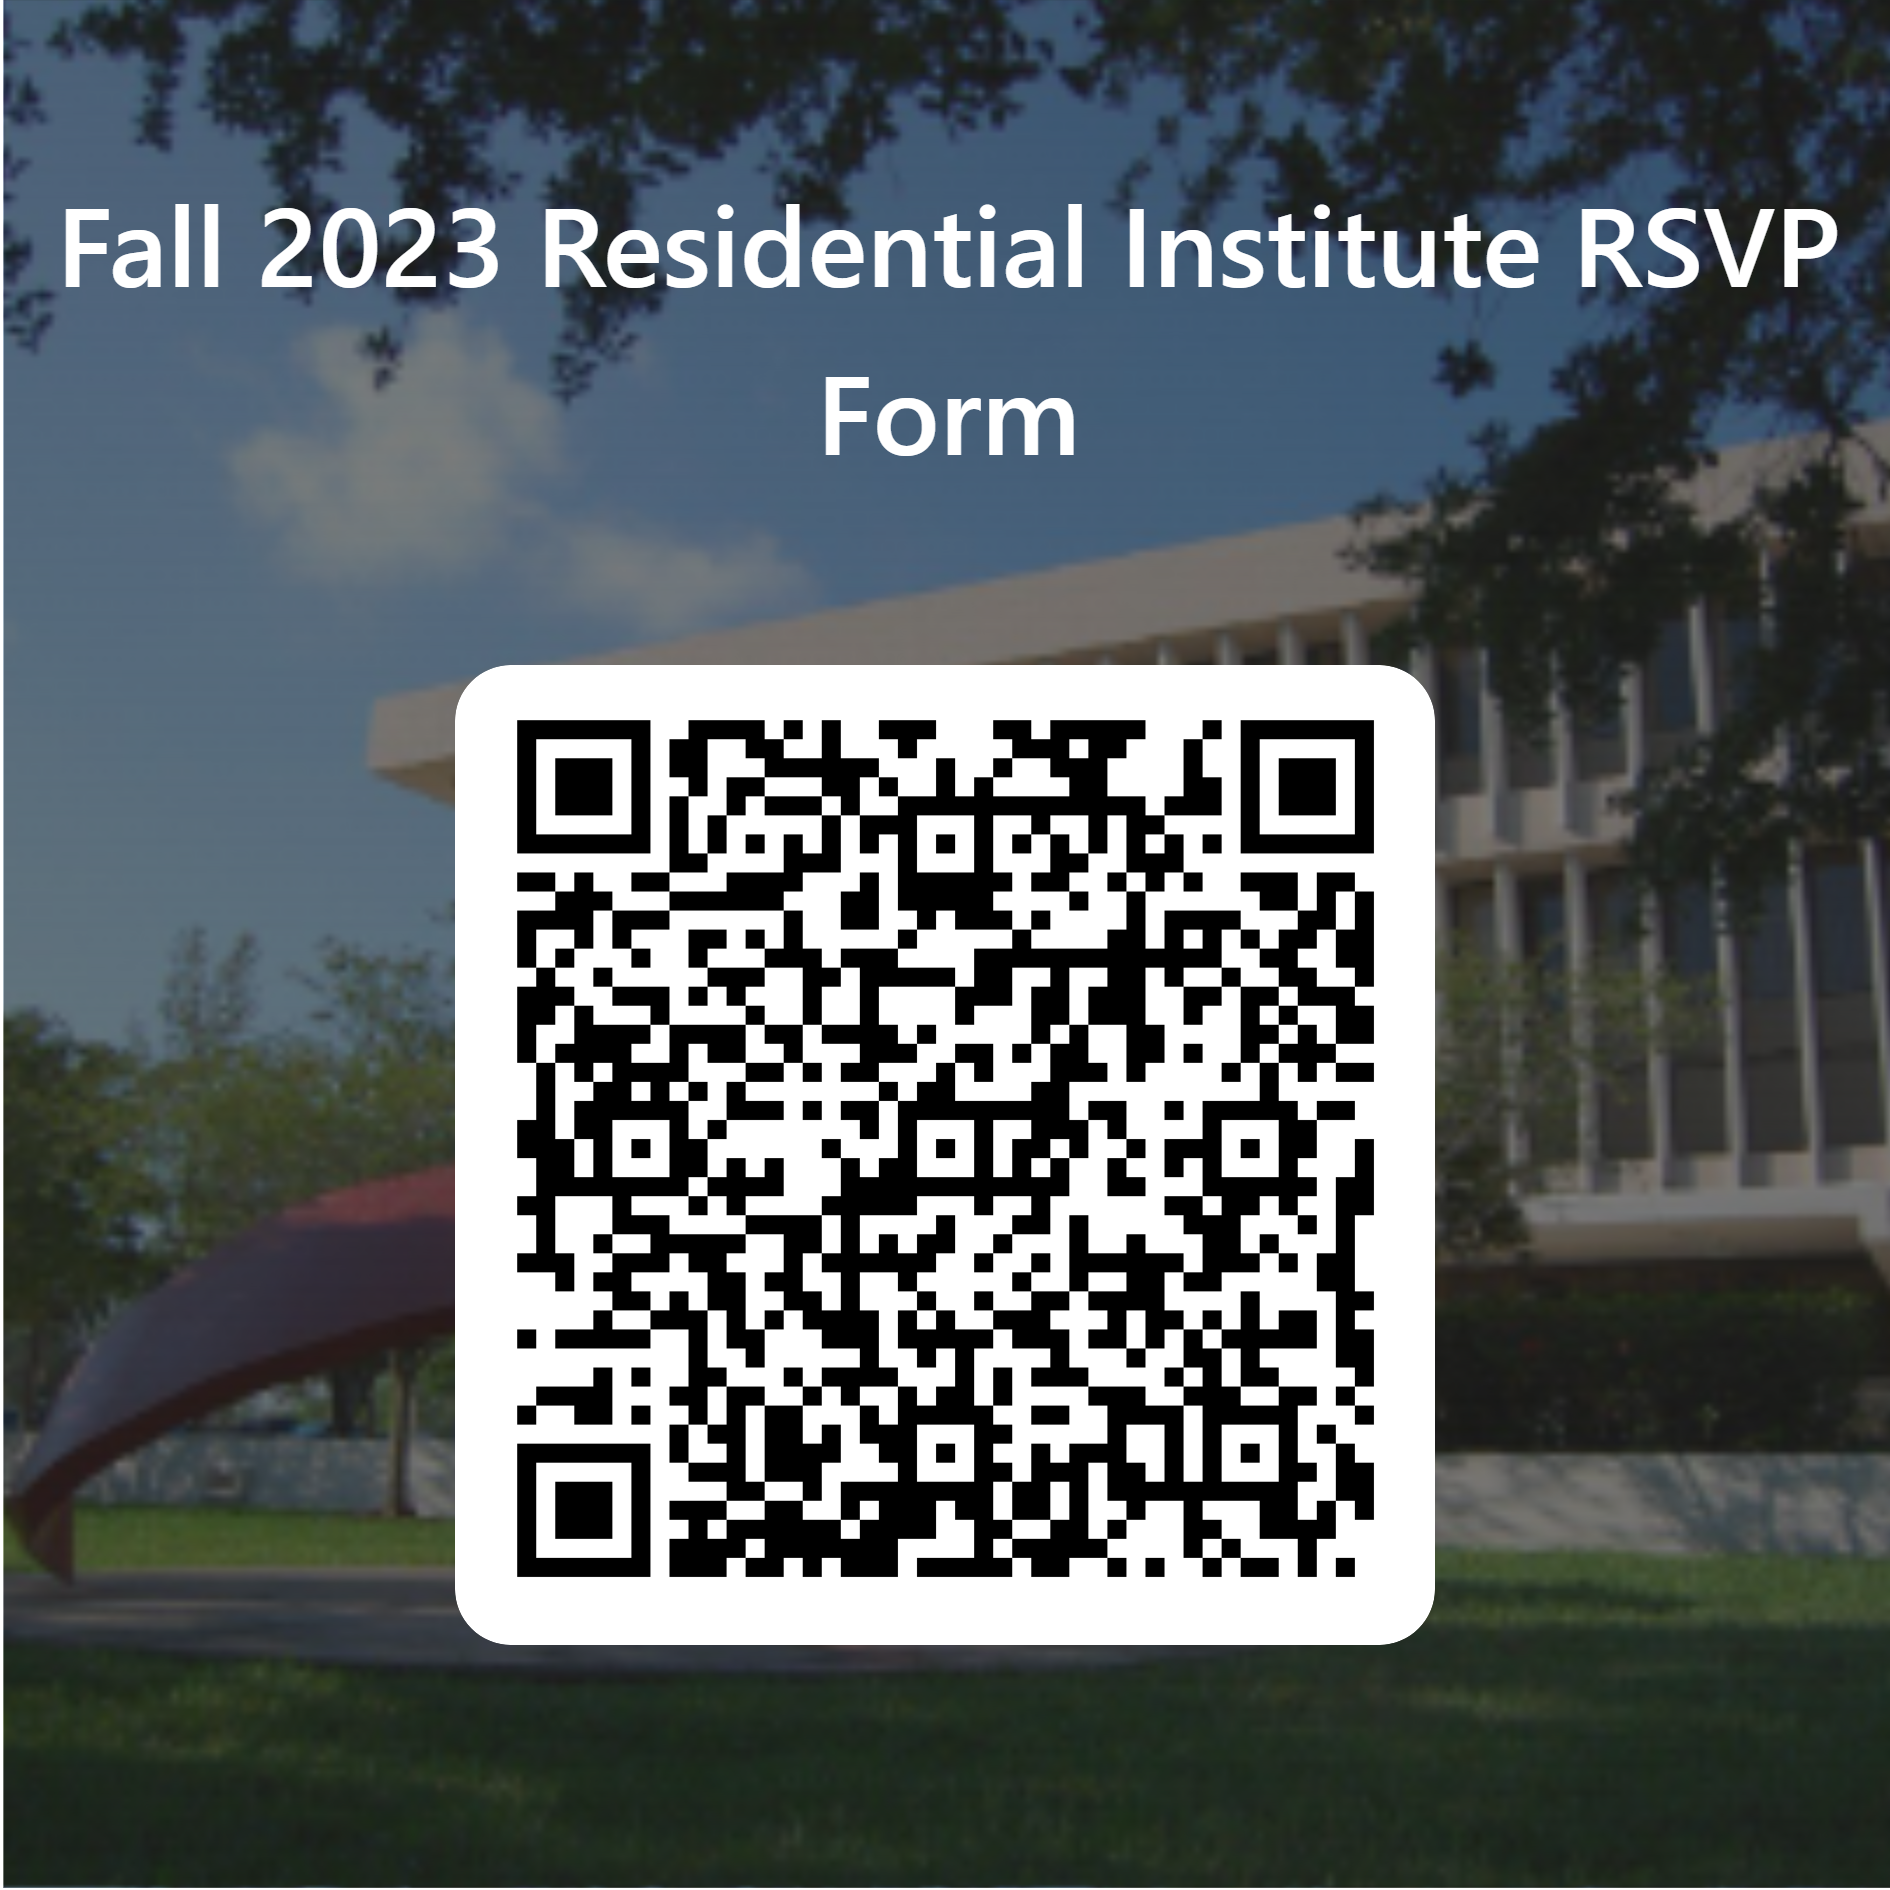 qrcode-for-fall-2023-residential-institute-rsvp-form-1.png